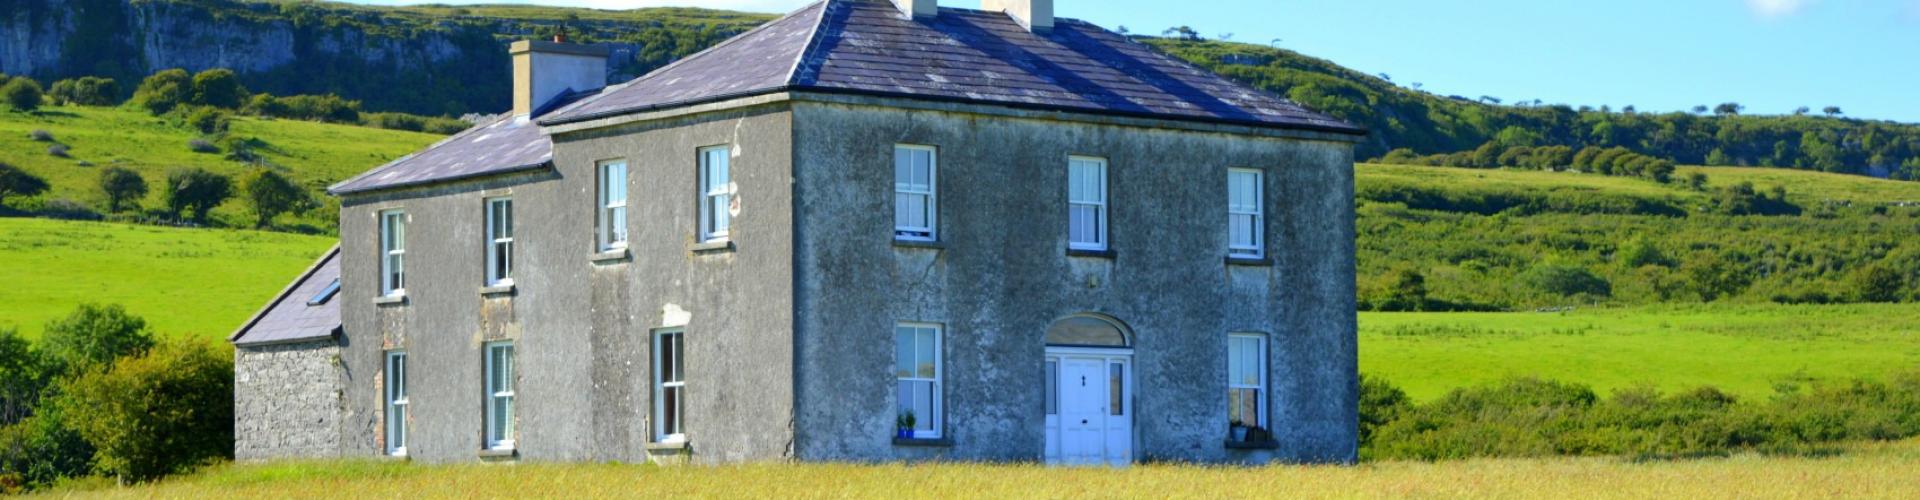 Father Teds House, Clare Attractions